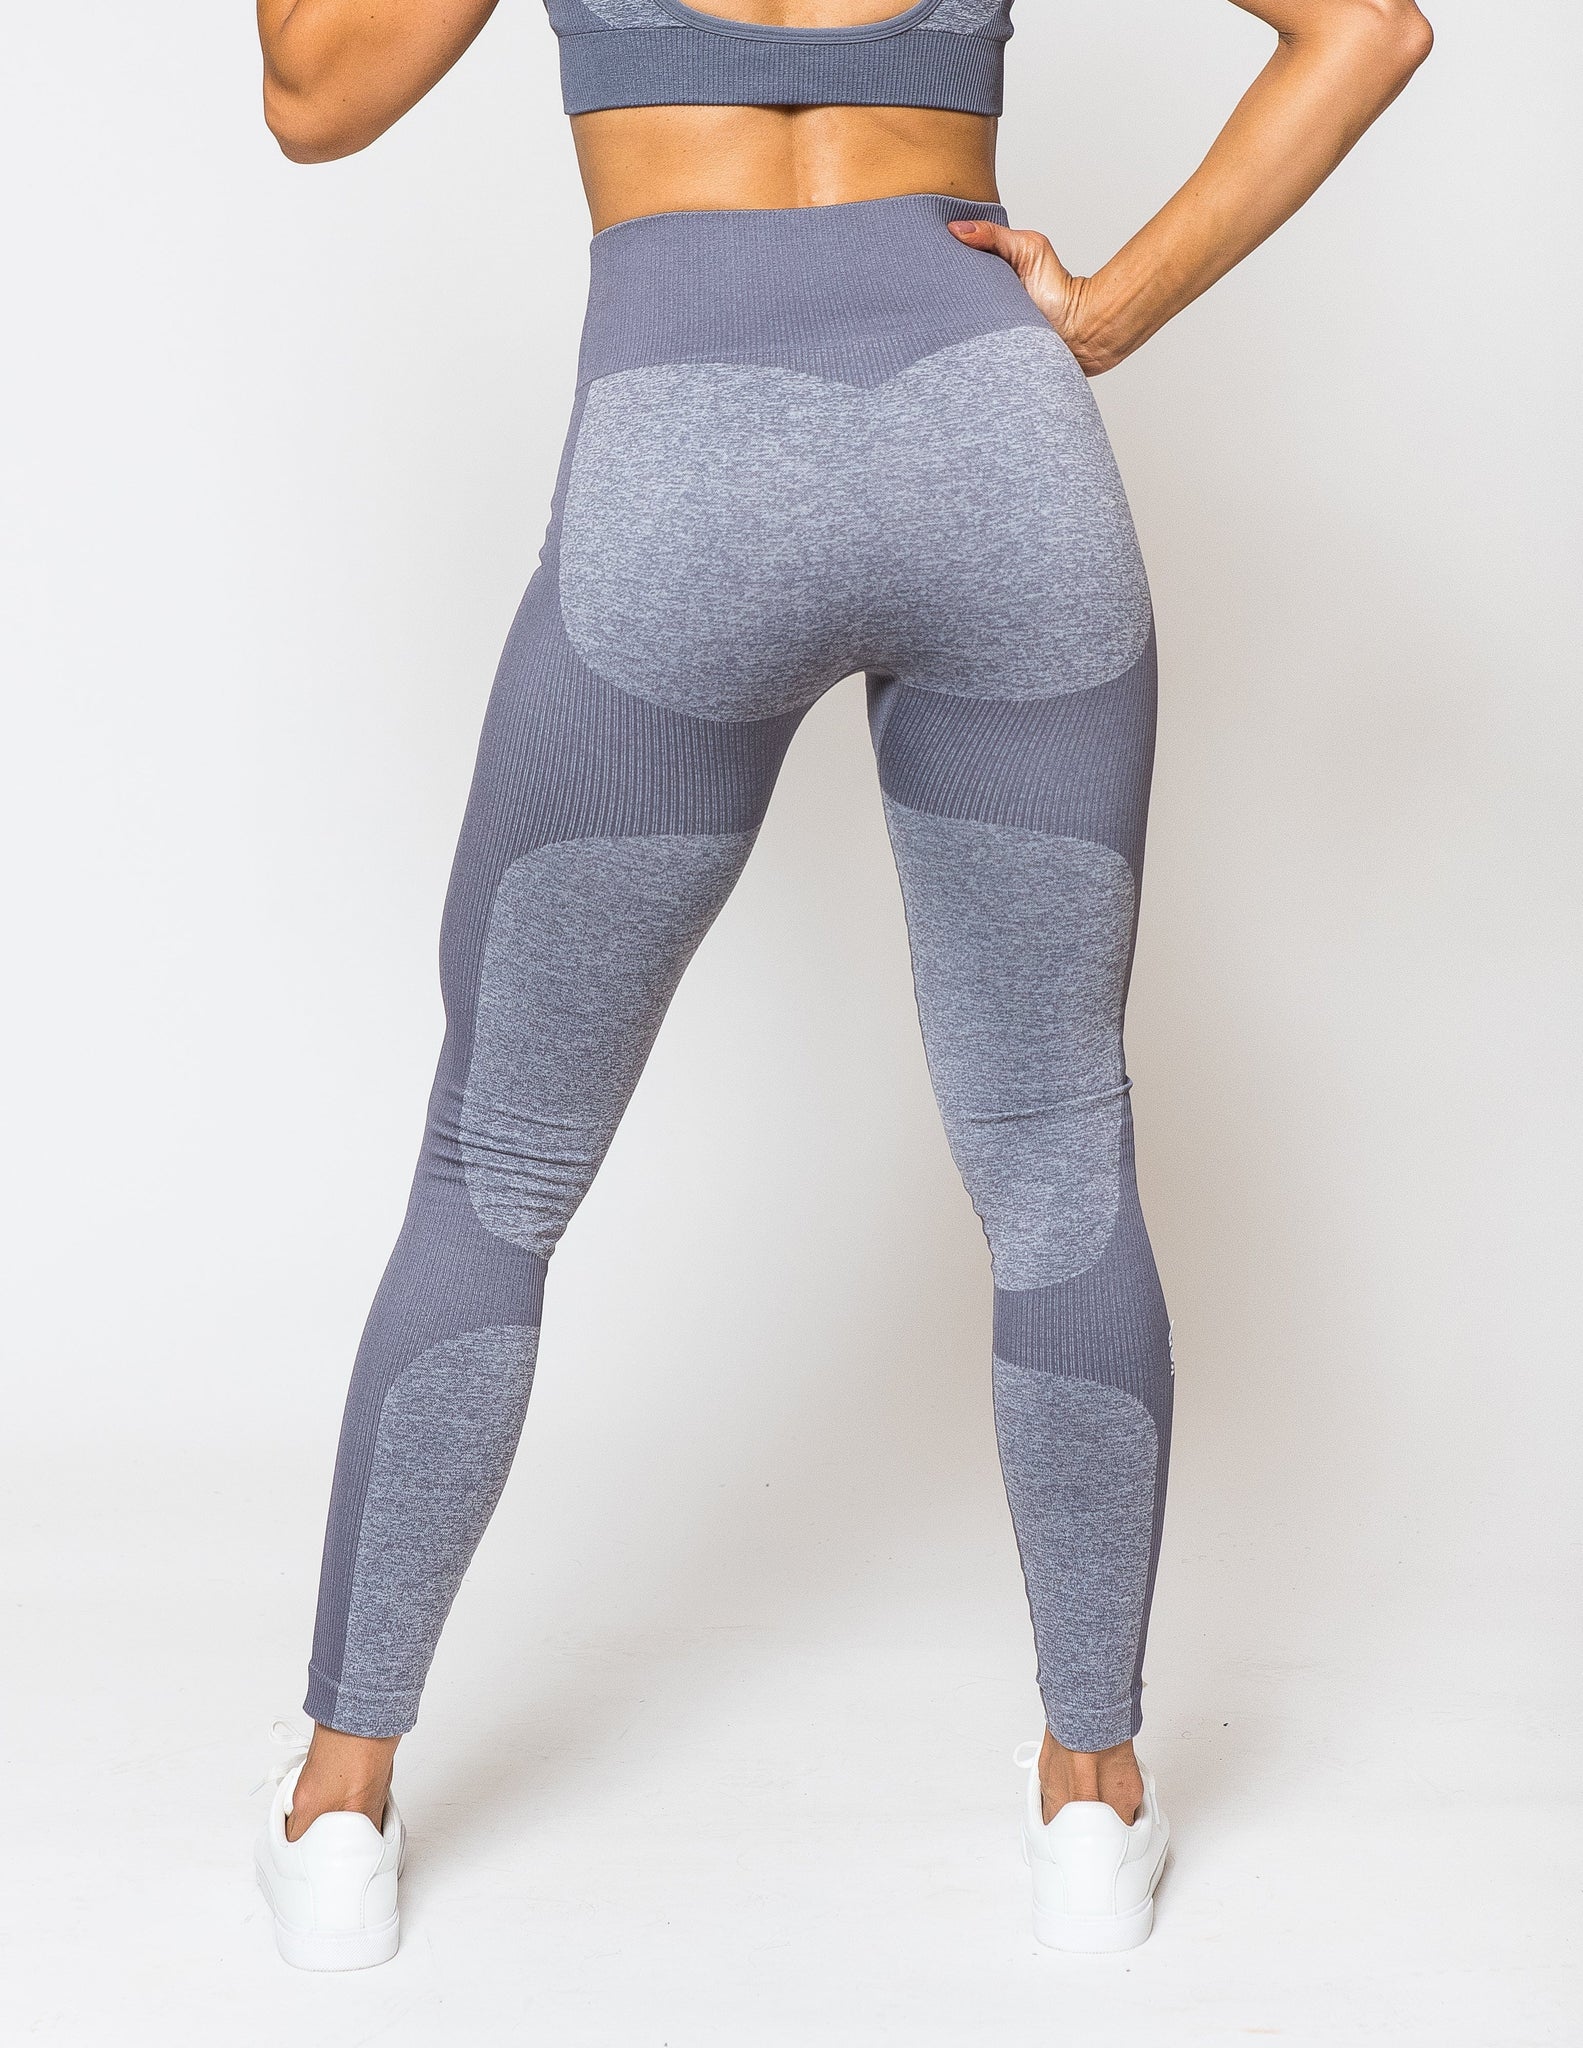 High Waisted Seamless Yoga Seamless Gym Leggings With Tummy Control For  Women Perfect For Gym And Sports 201014 From Xue04, $16.65